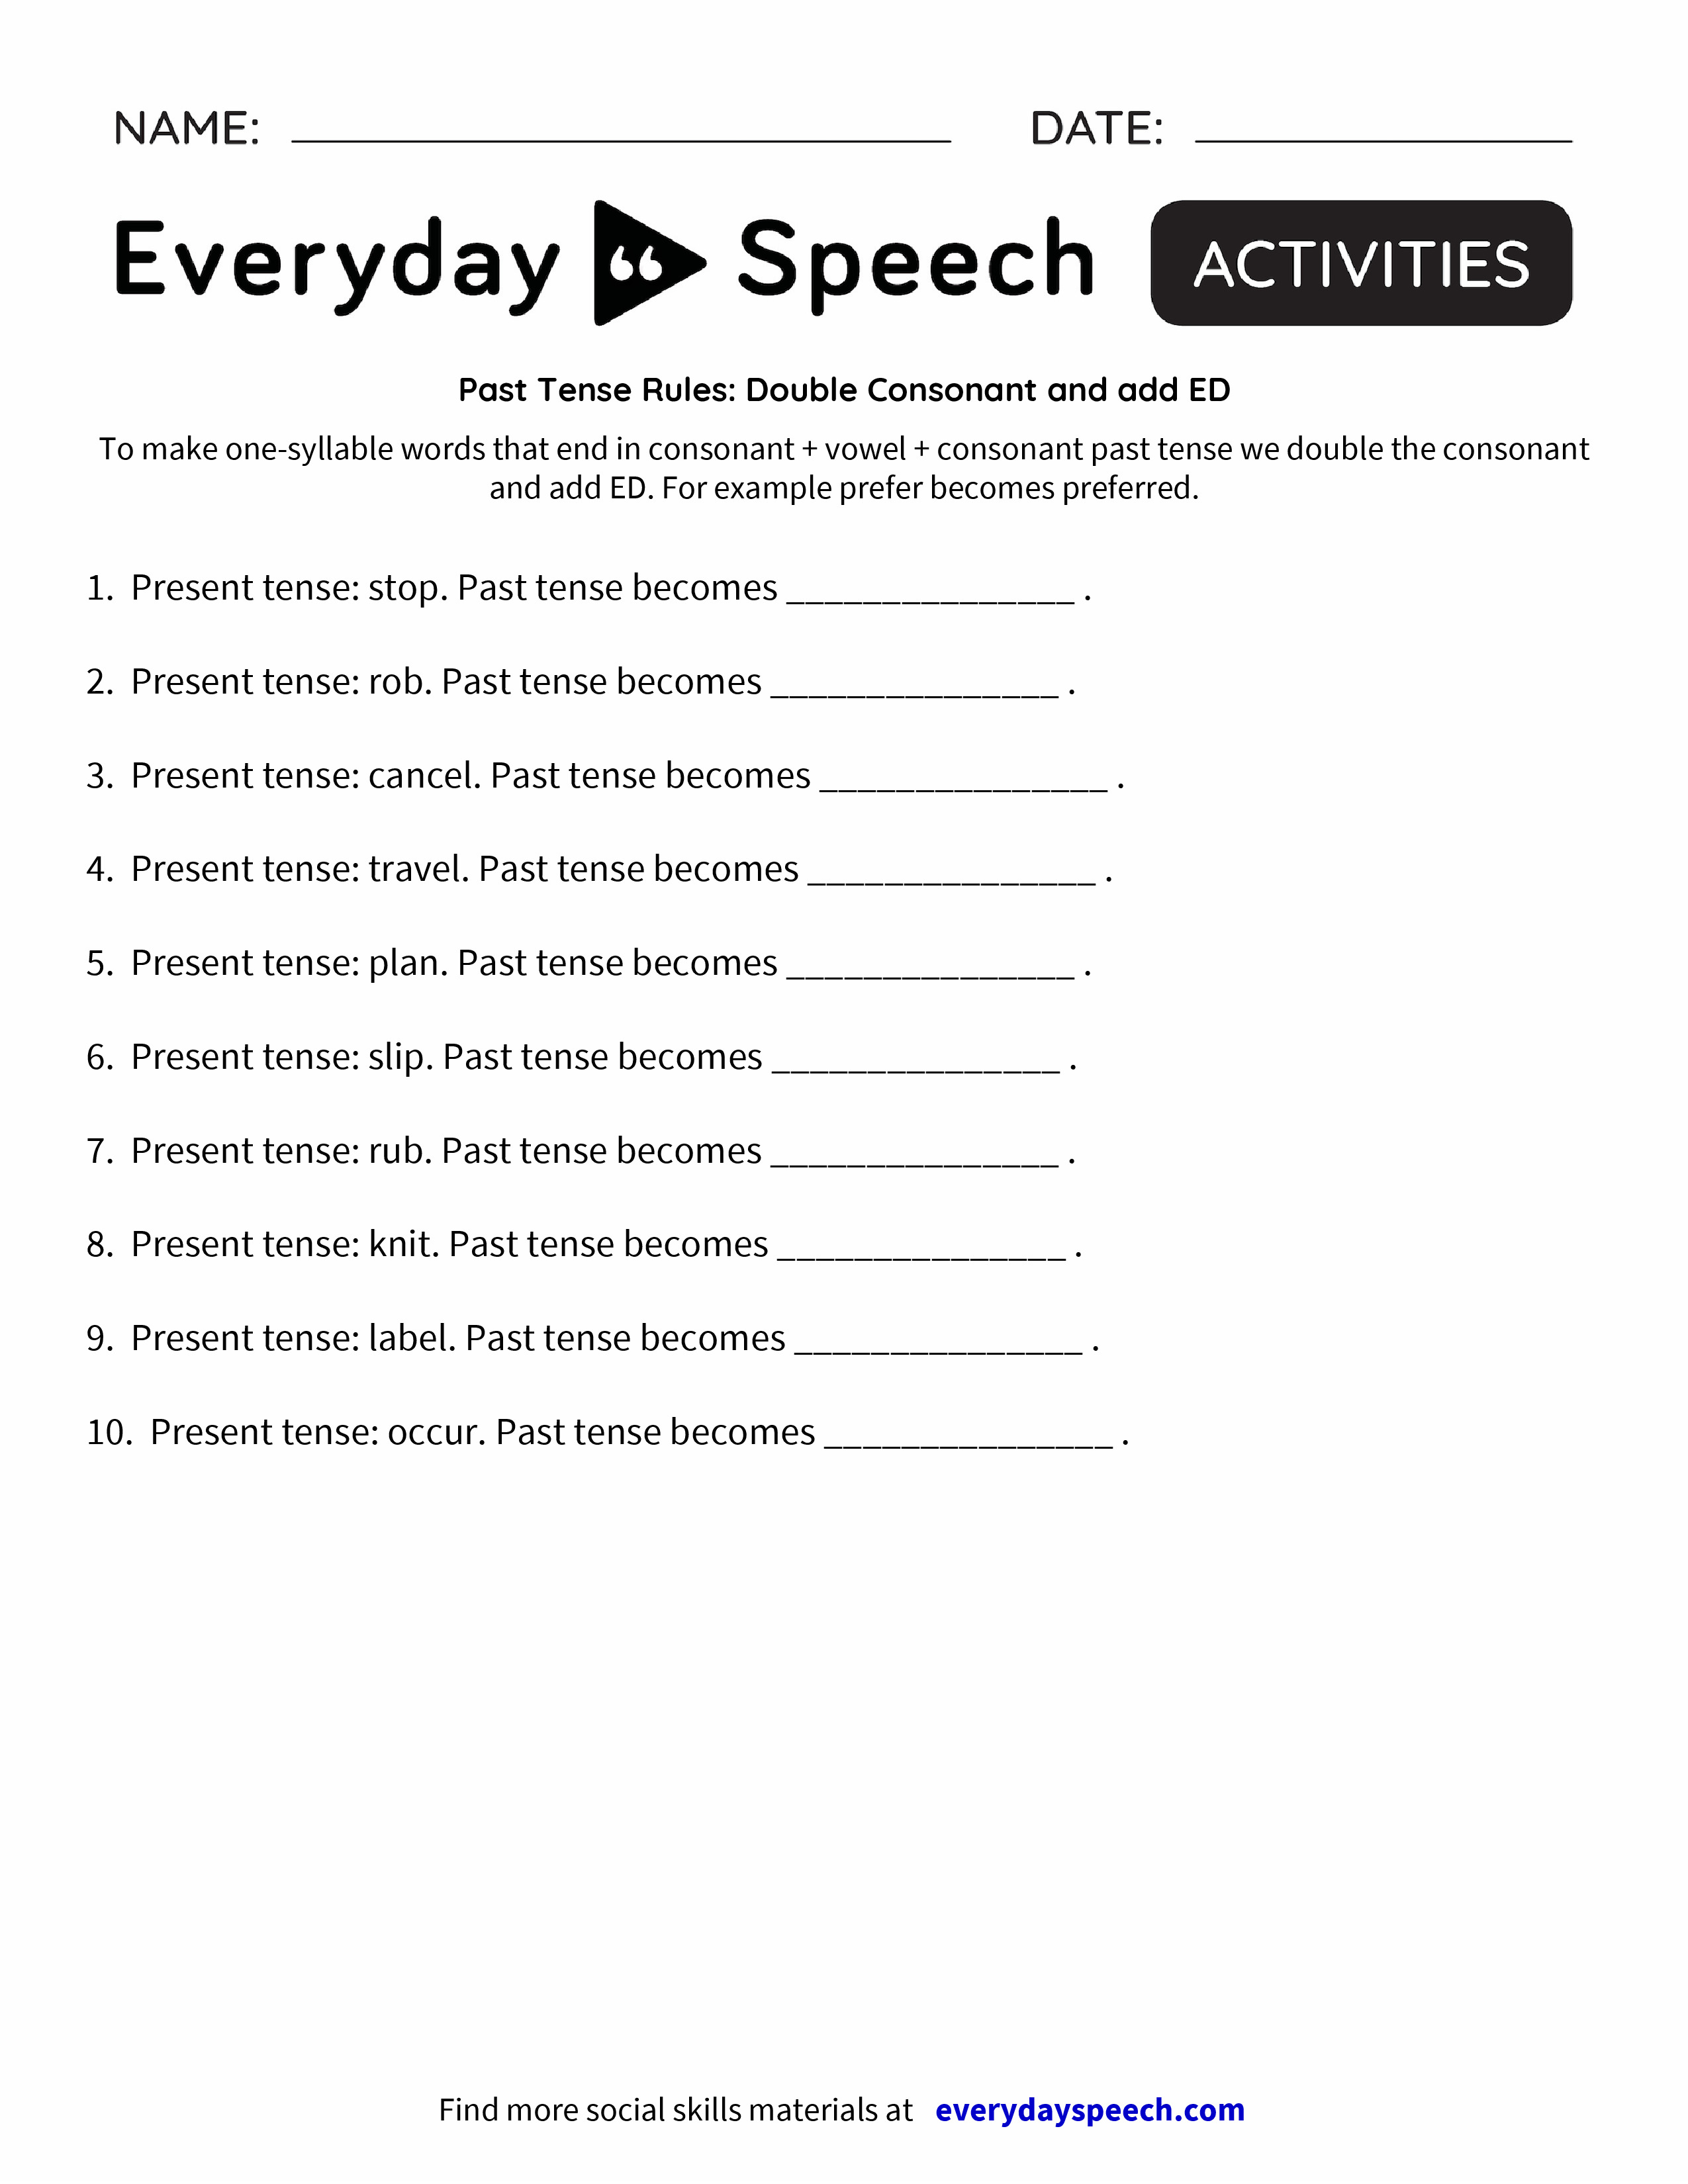 past-tense-rules-double-consonant-and-add-ed-everyday-speech